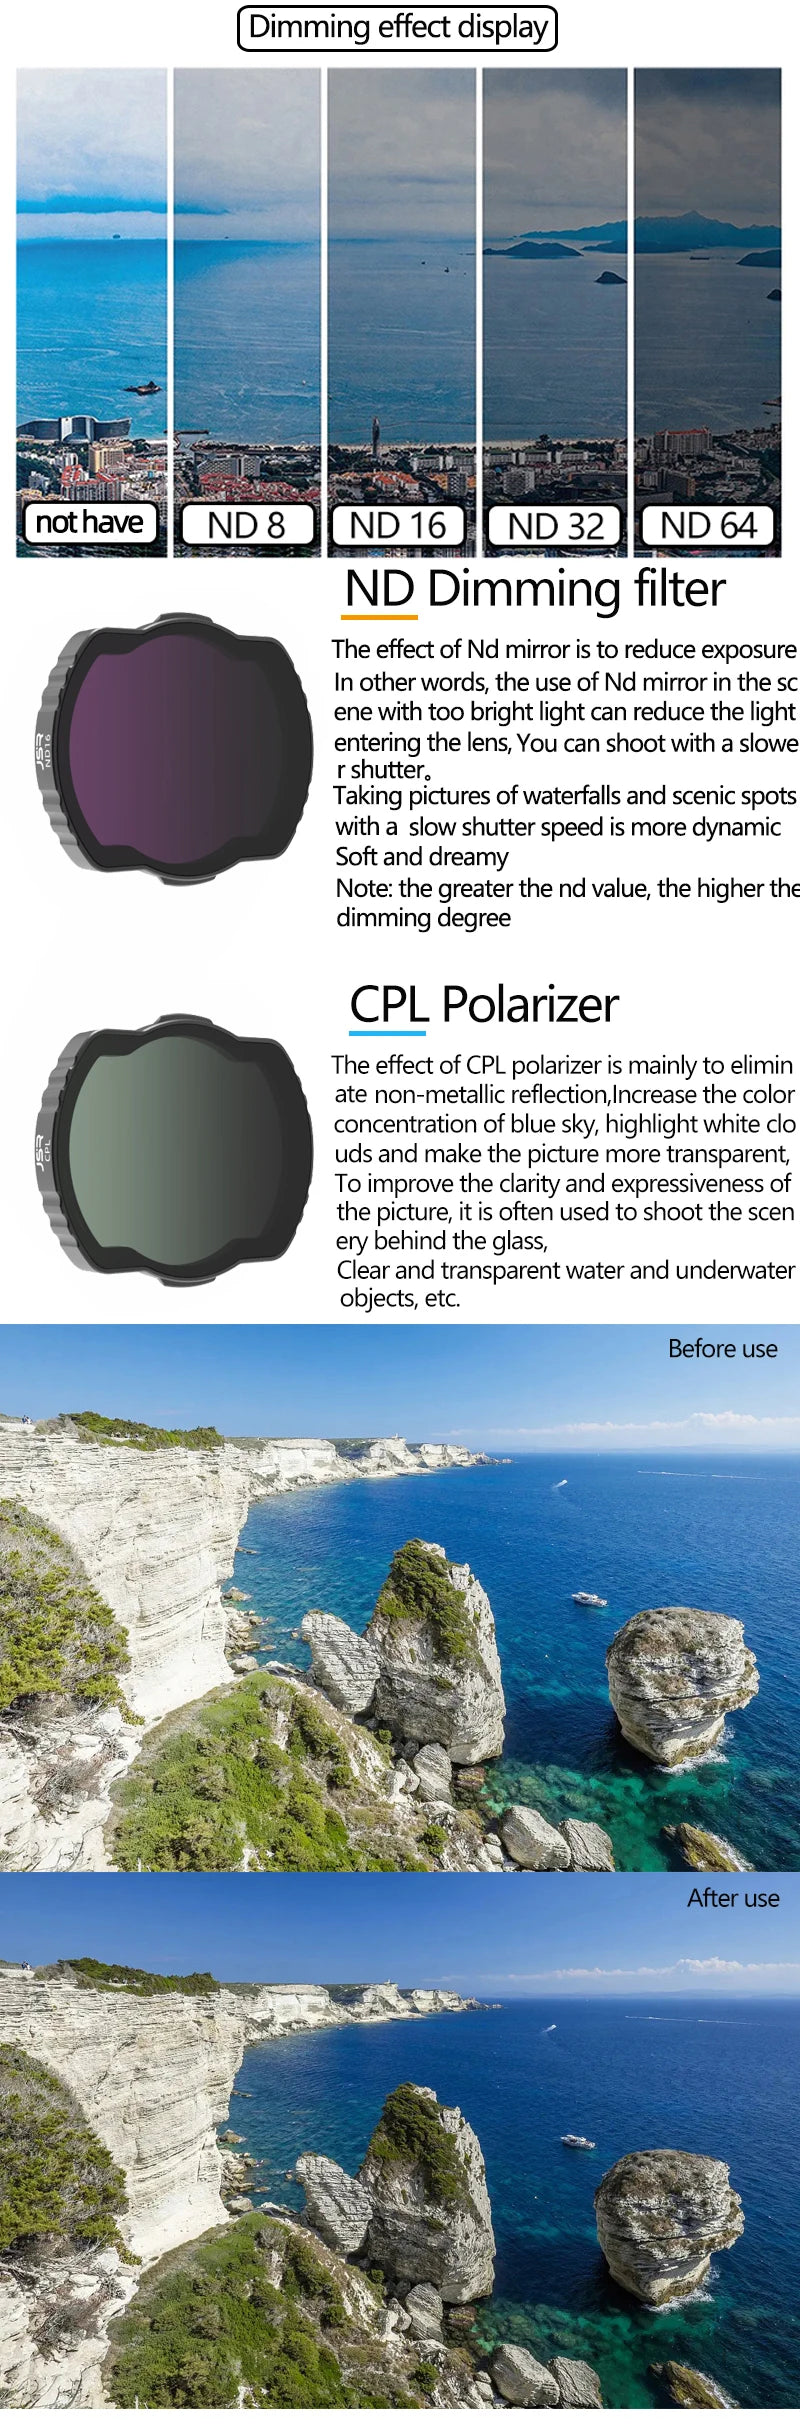 New Filter, the greater the nd value; the higher the dimming degree CPL Polarizer is